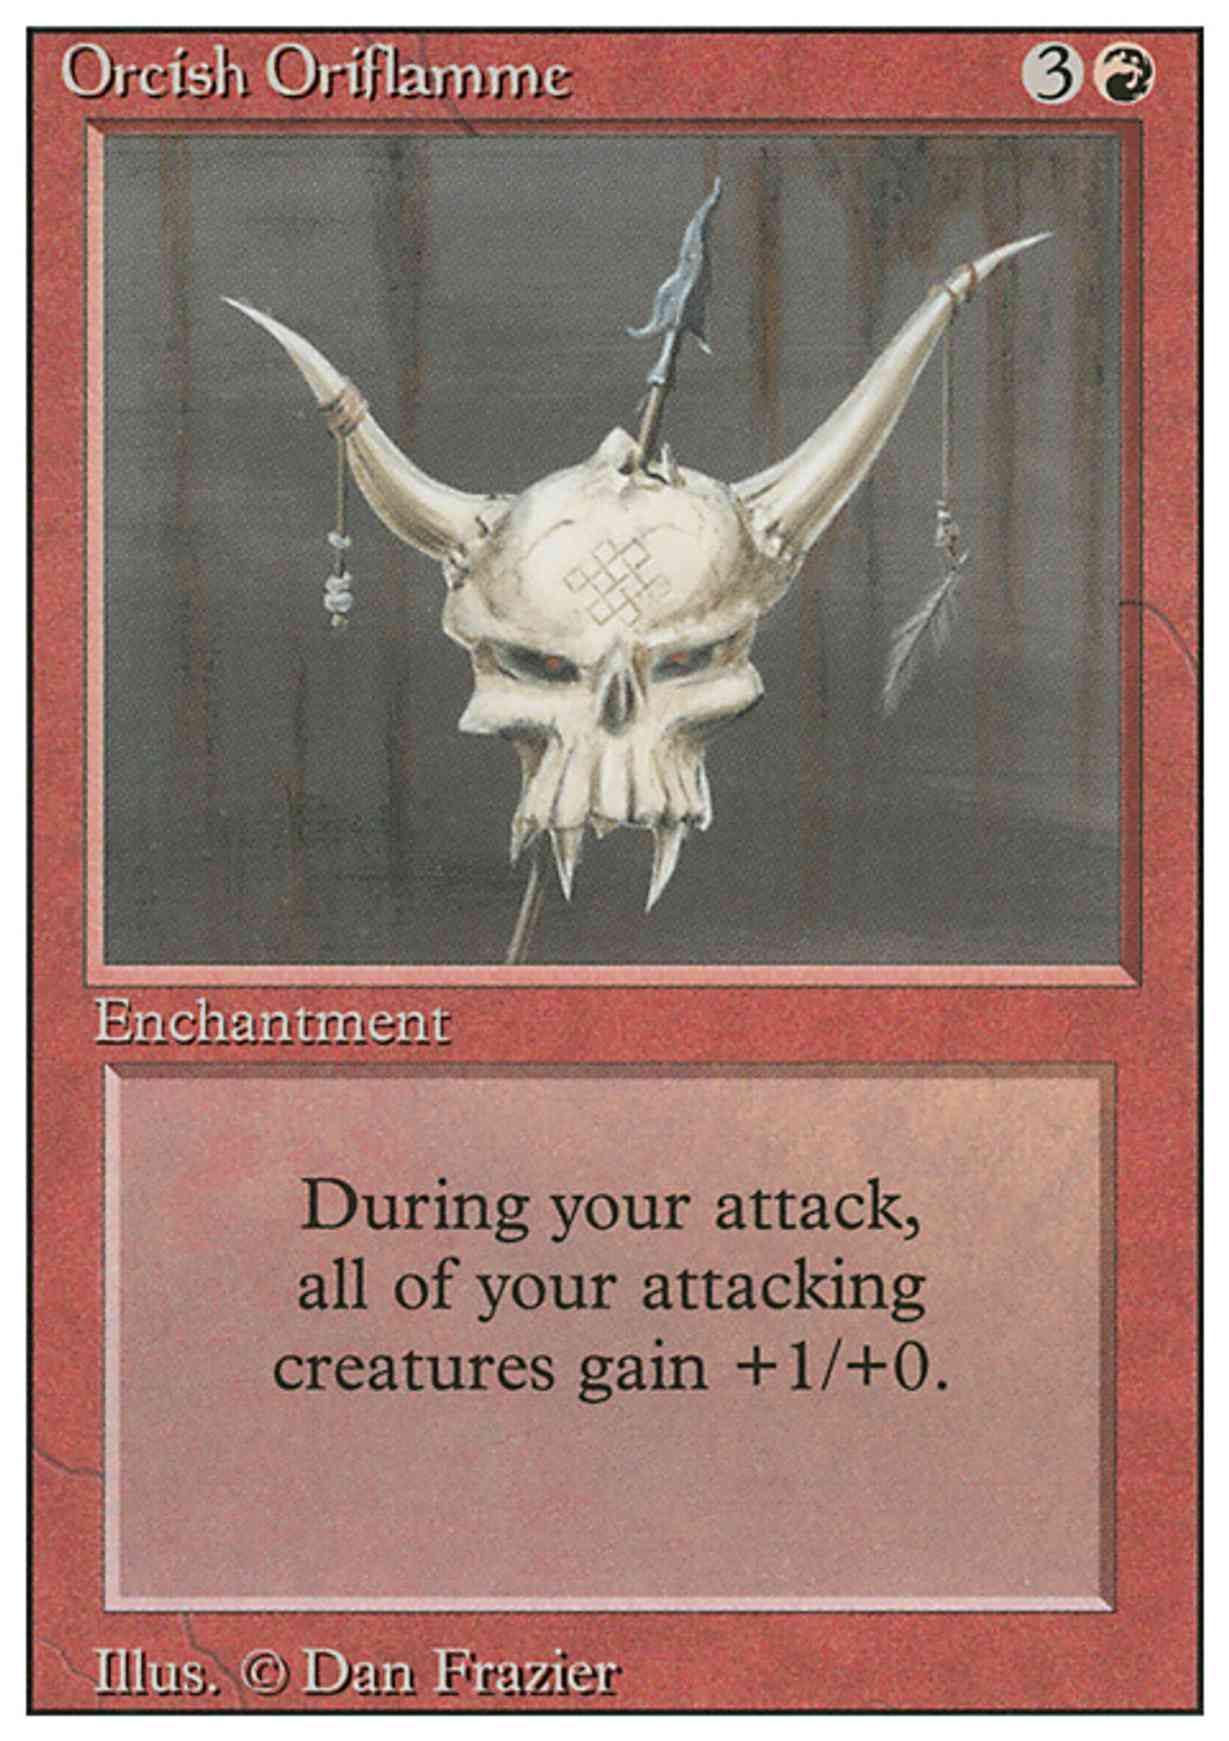 Orcish Oriflamme magic card front